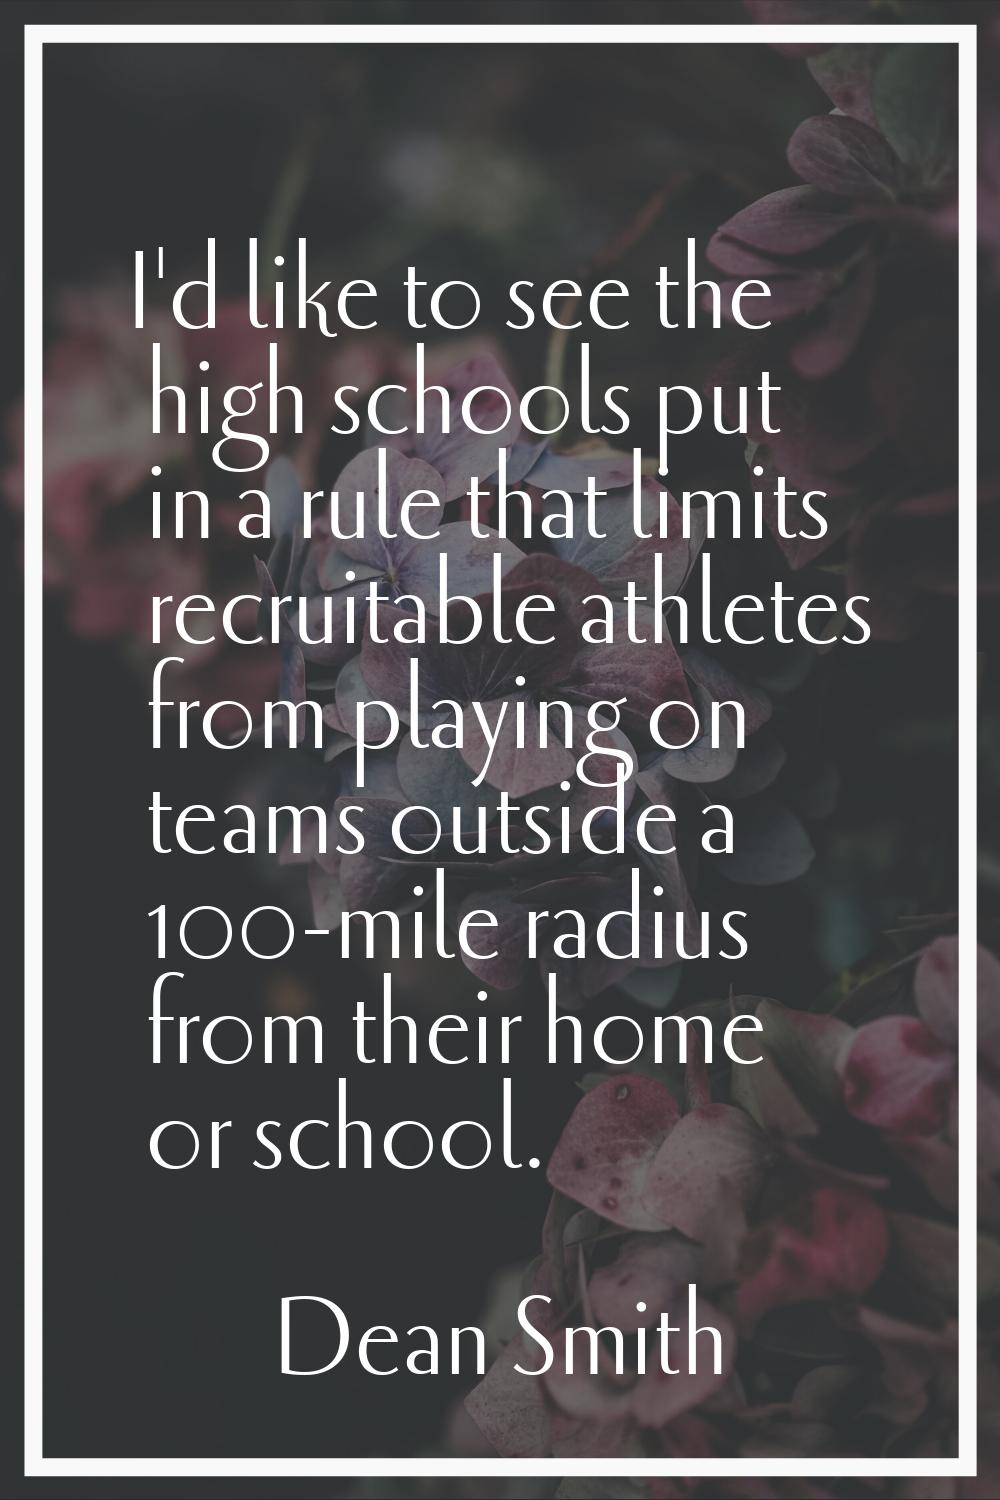 I'd like to see the high schools put in a rule that limits recruitable athletes from playing on tea